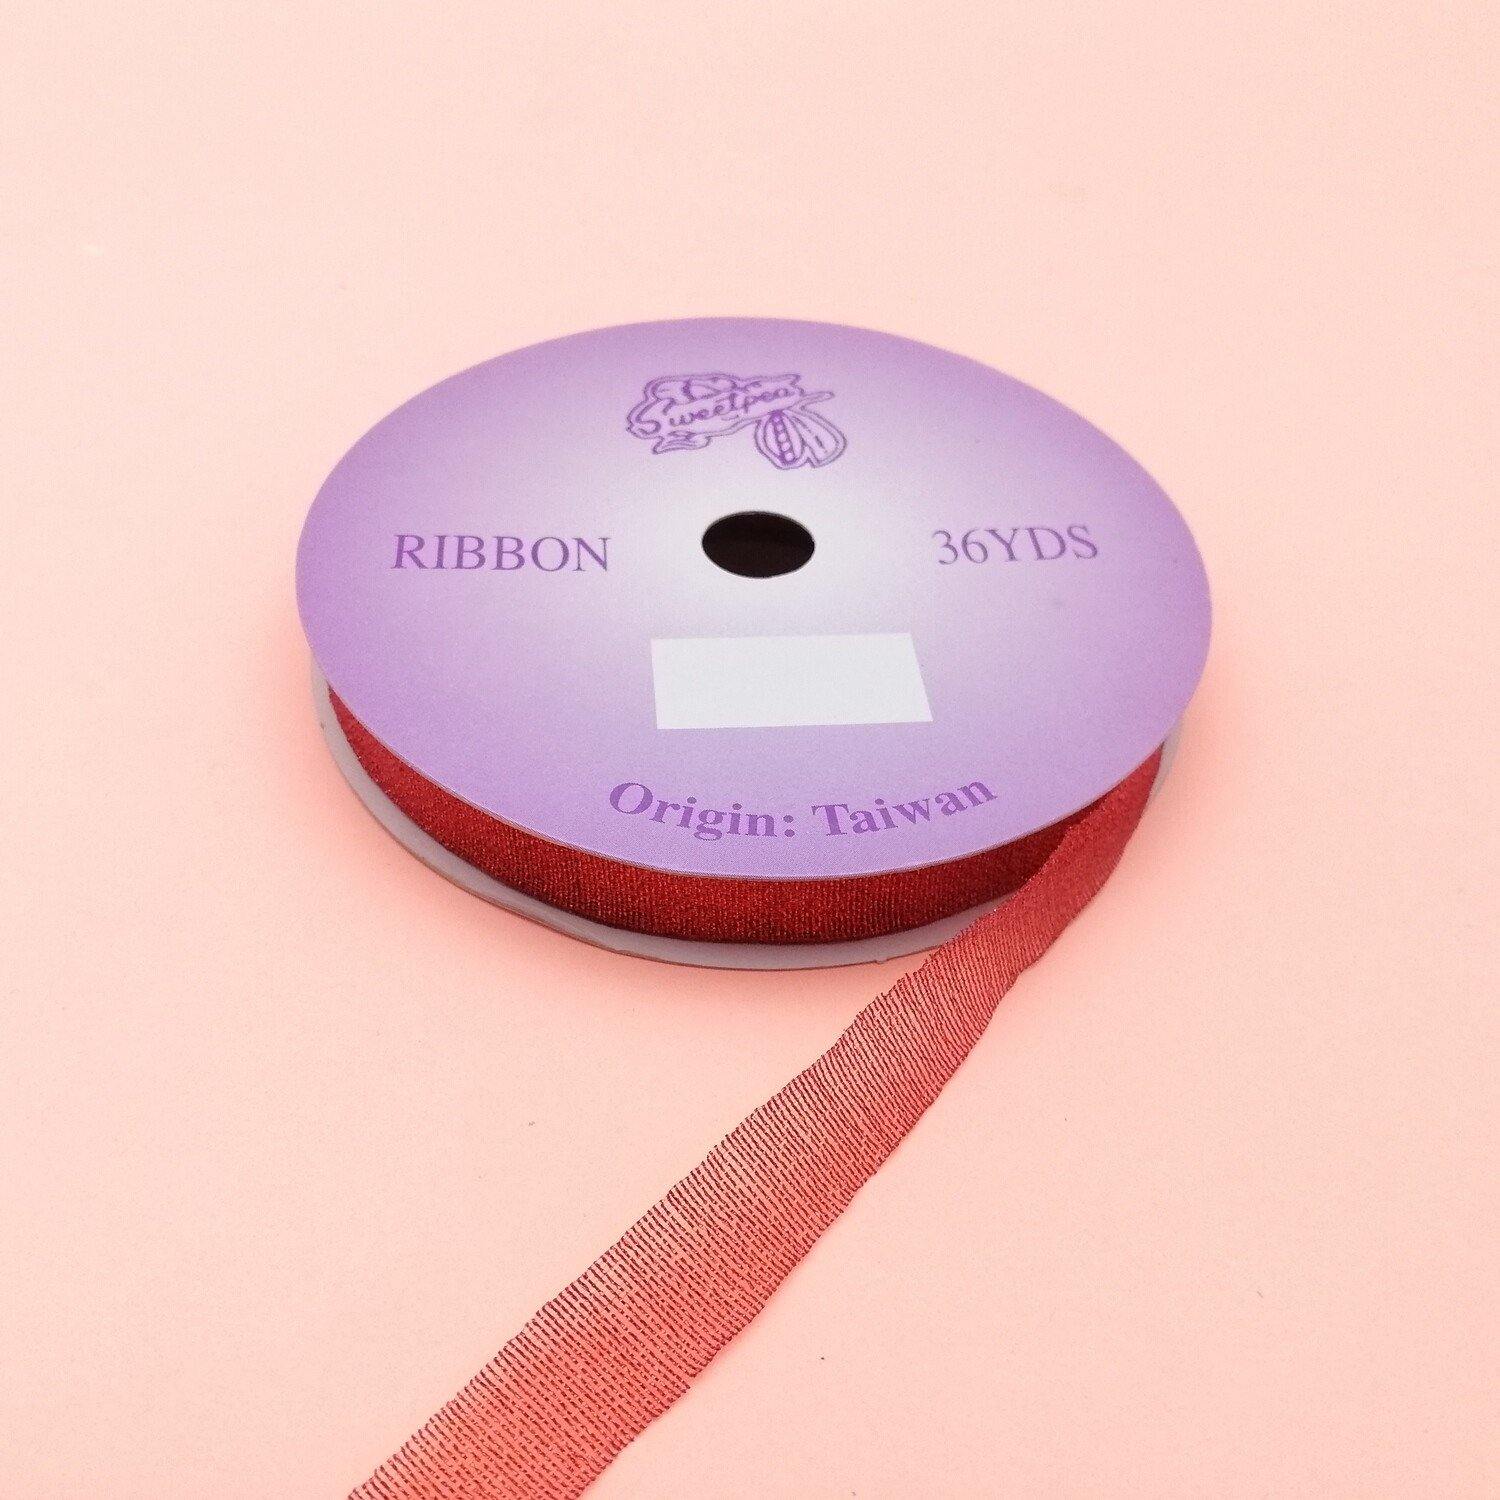 1/2" G-809 RED RIBBON 1ROLL (36YDS) - Kitchen Convenience: Ingredients & Supplies Delivery